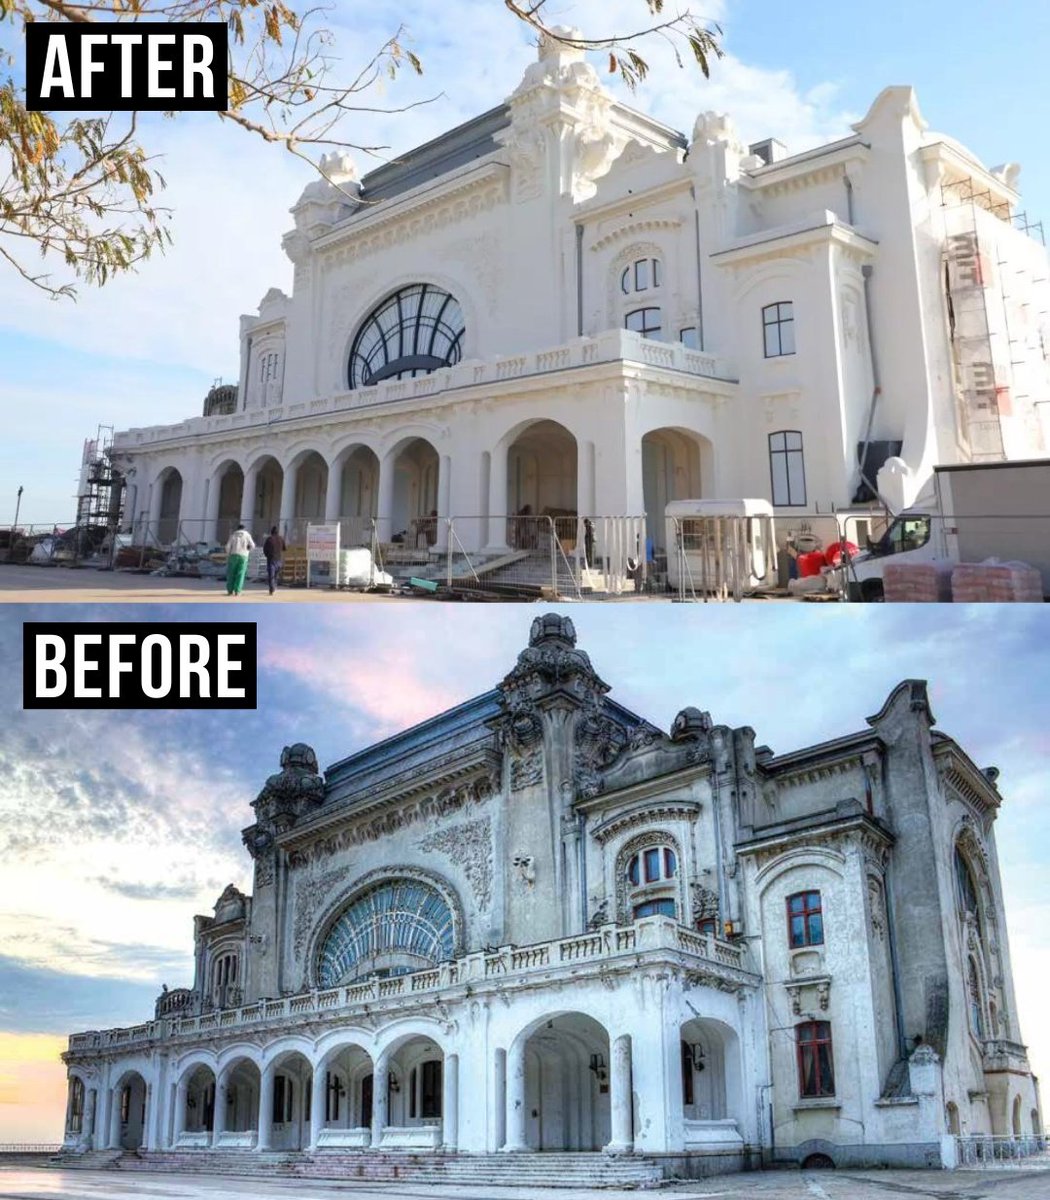 The Constanța Casino at the Romanian Black Sea coast. The Casino was built in 1880 in the Art Nouveau style and is undergoing restauration after being abandoned for a long time. The Casino will reopen on August 1st as a museum. 🇷🇴